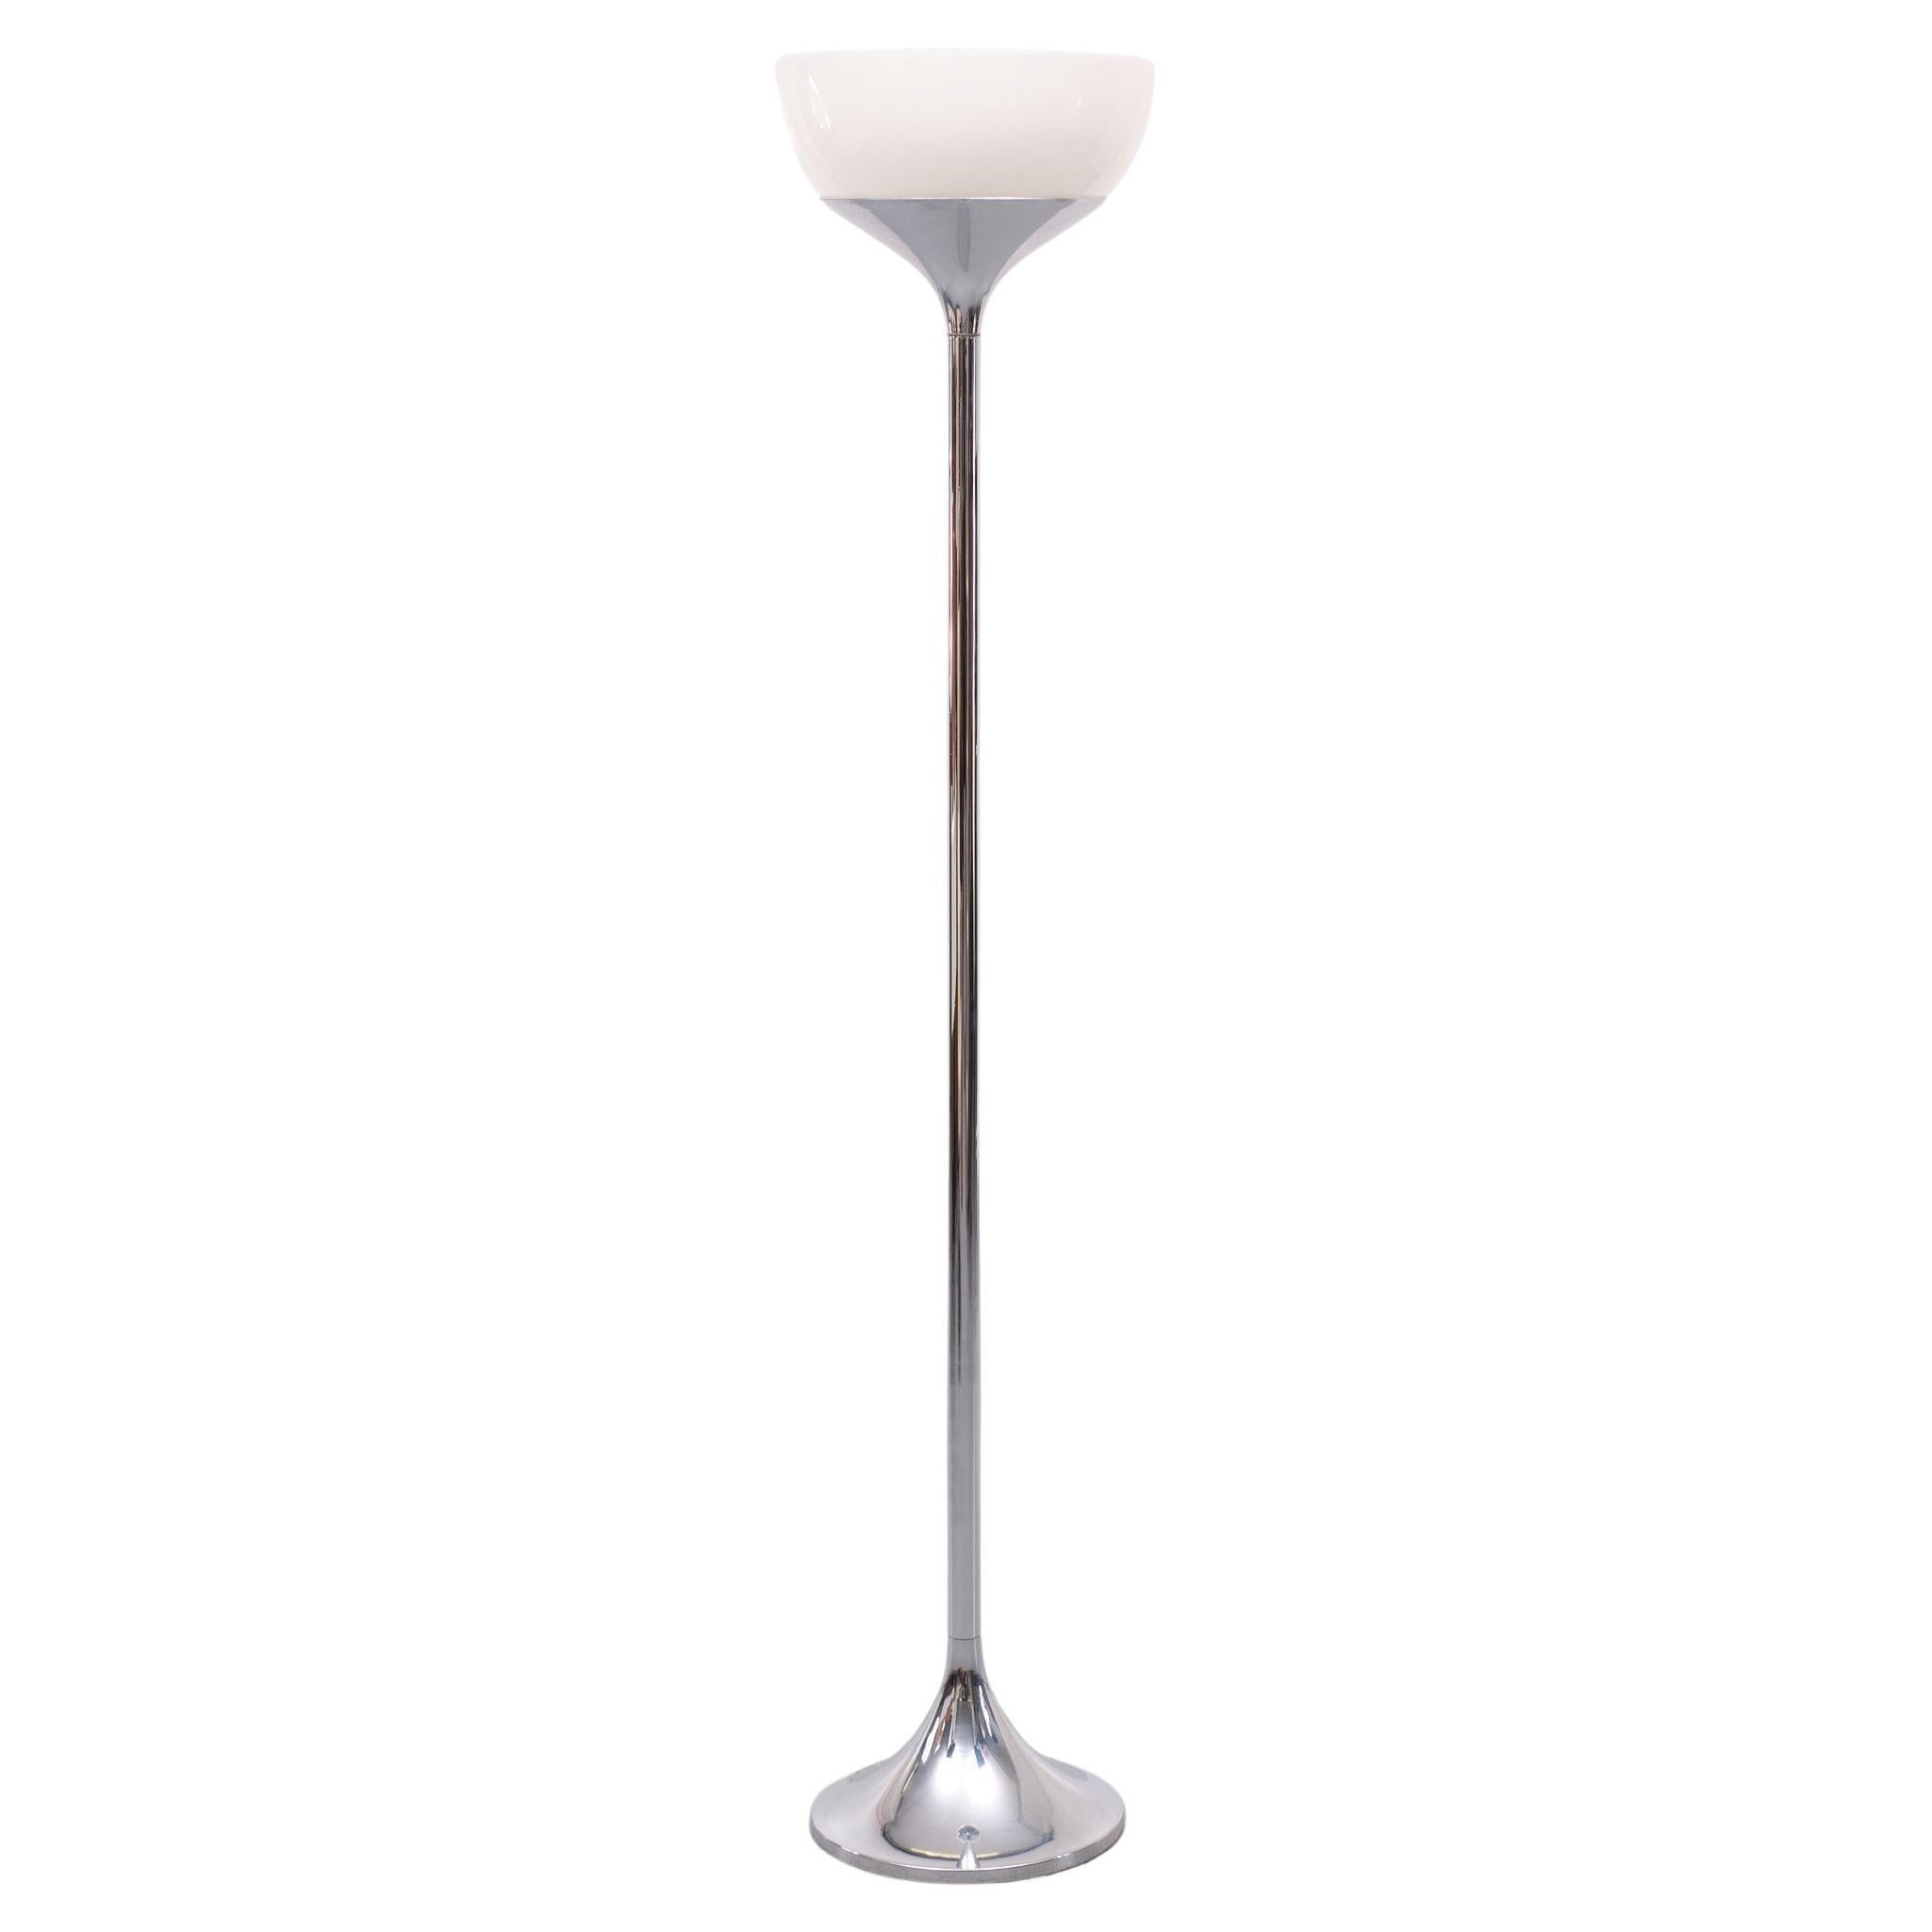 Very nice floor lamp. Chrome tulip shaped upright, comes with a Acrylic shade.
Typical Space Ace era. Design by Guzzini 1970s, Italy. 
1 Large E27 bulb needed. Good condition.